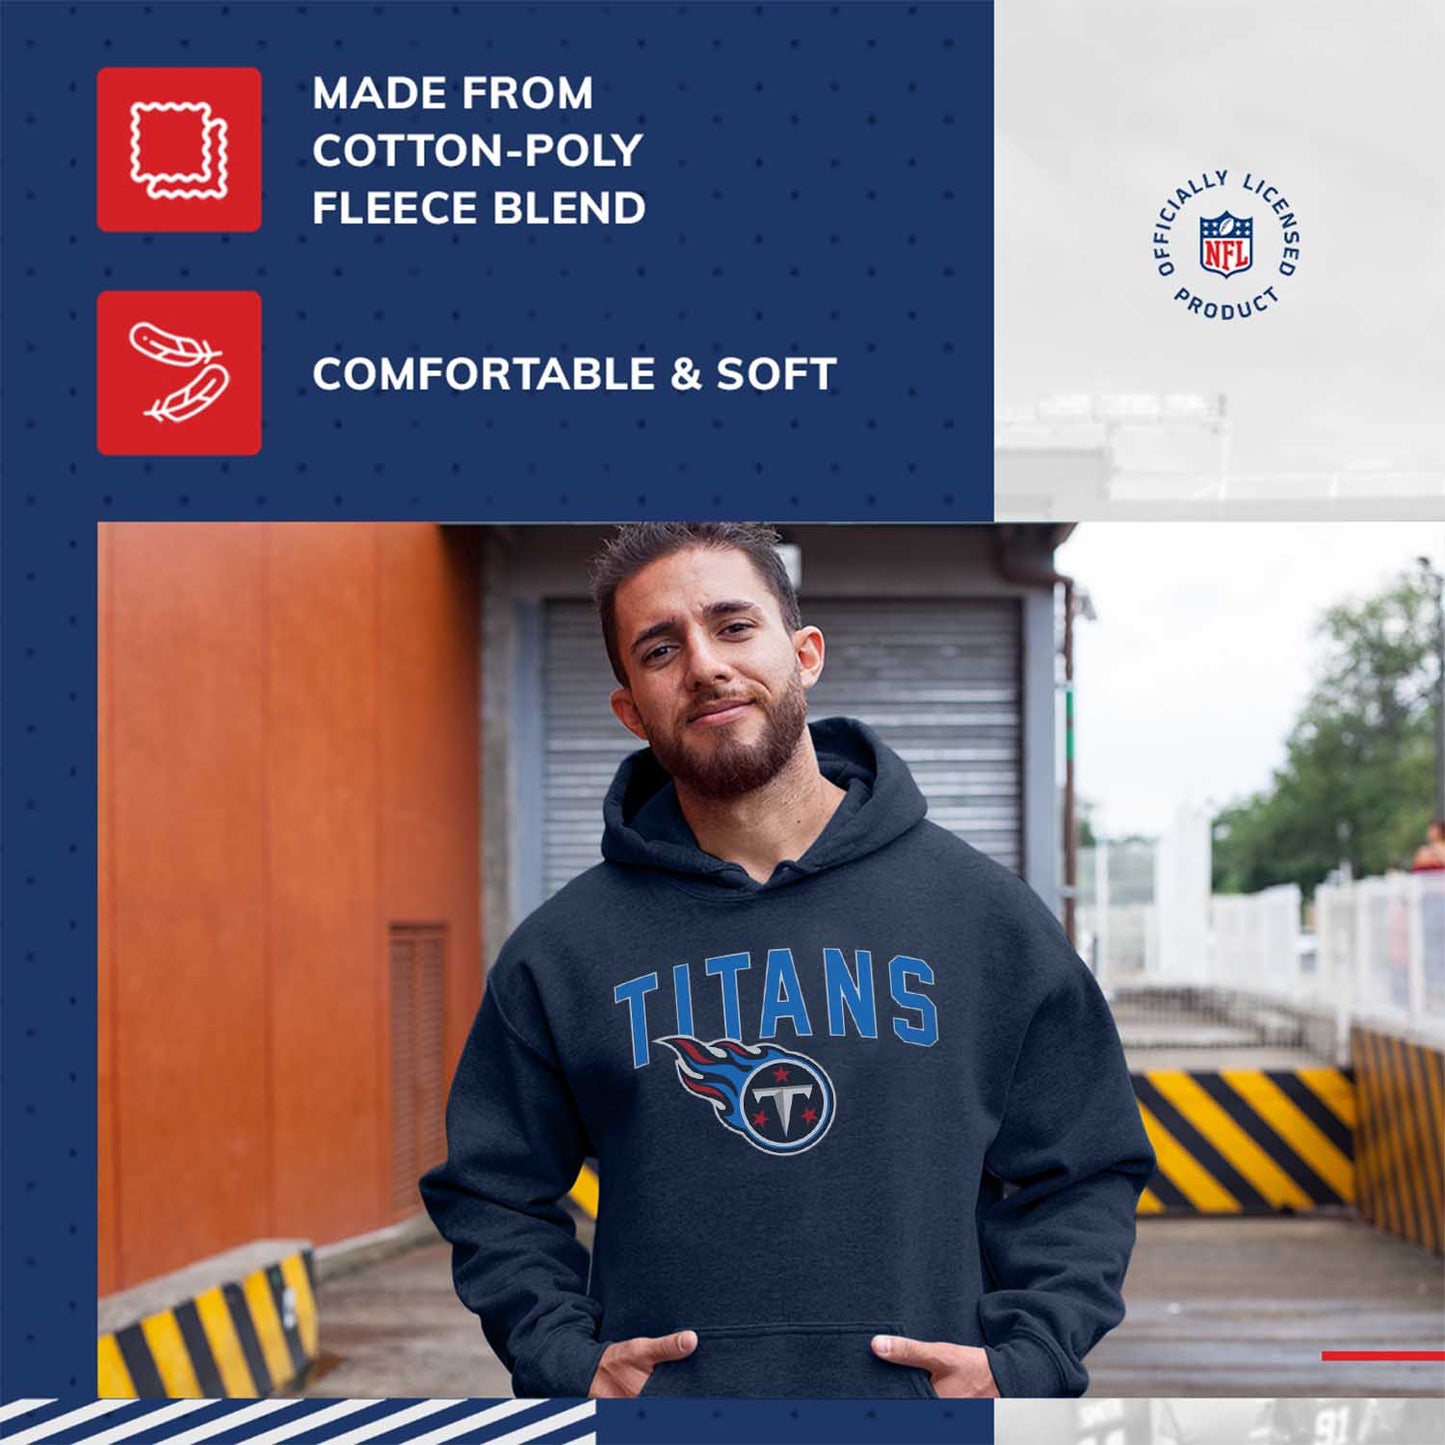 Tennessee Titans NFL Home Team Hoodie - Navy